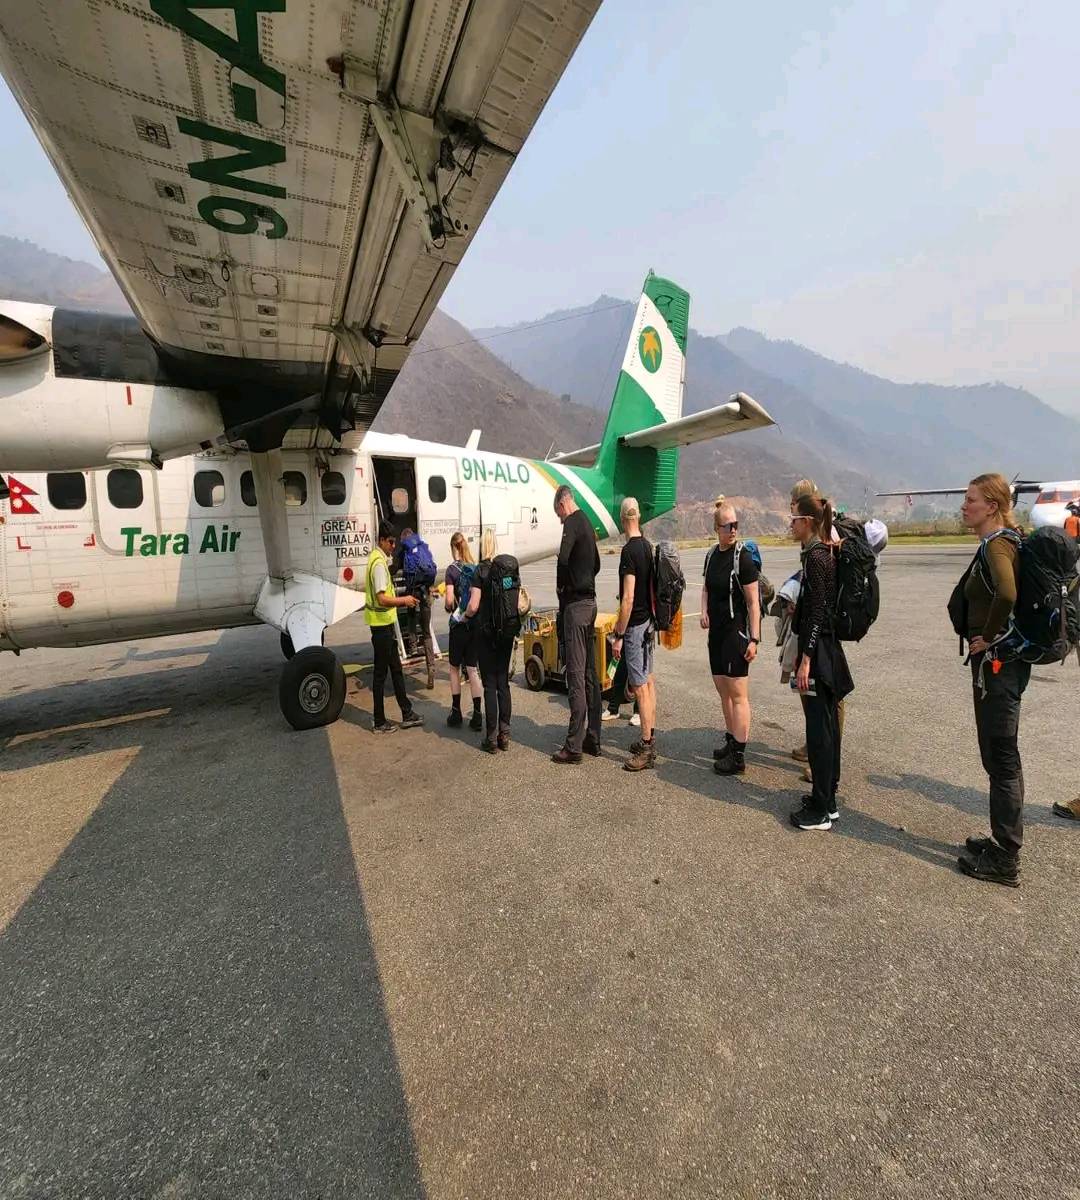 Tara Air operating flights from Manthali to Lukla several times a day (with photos)